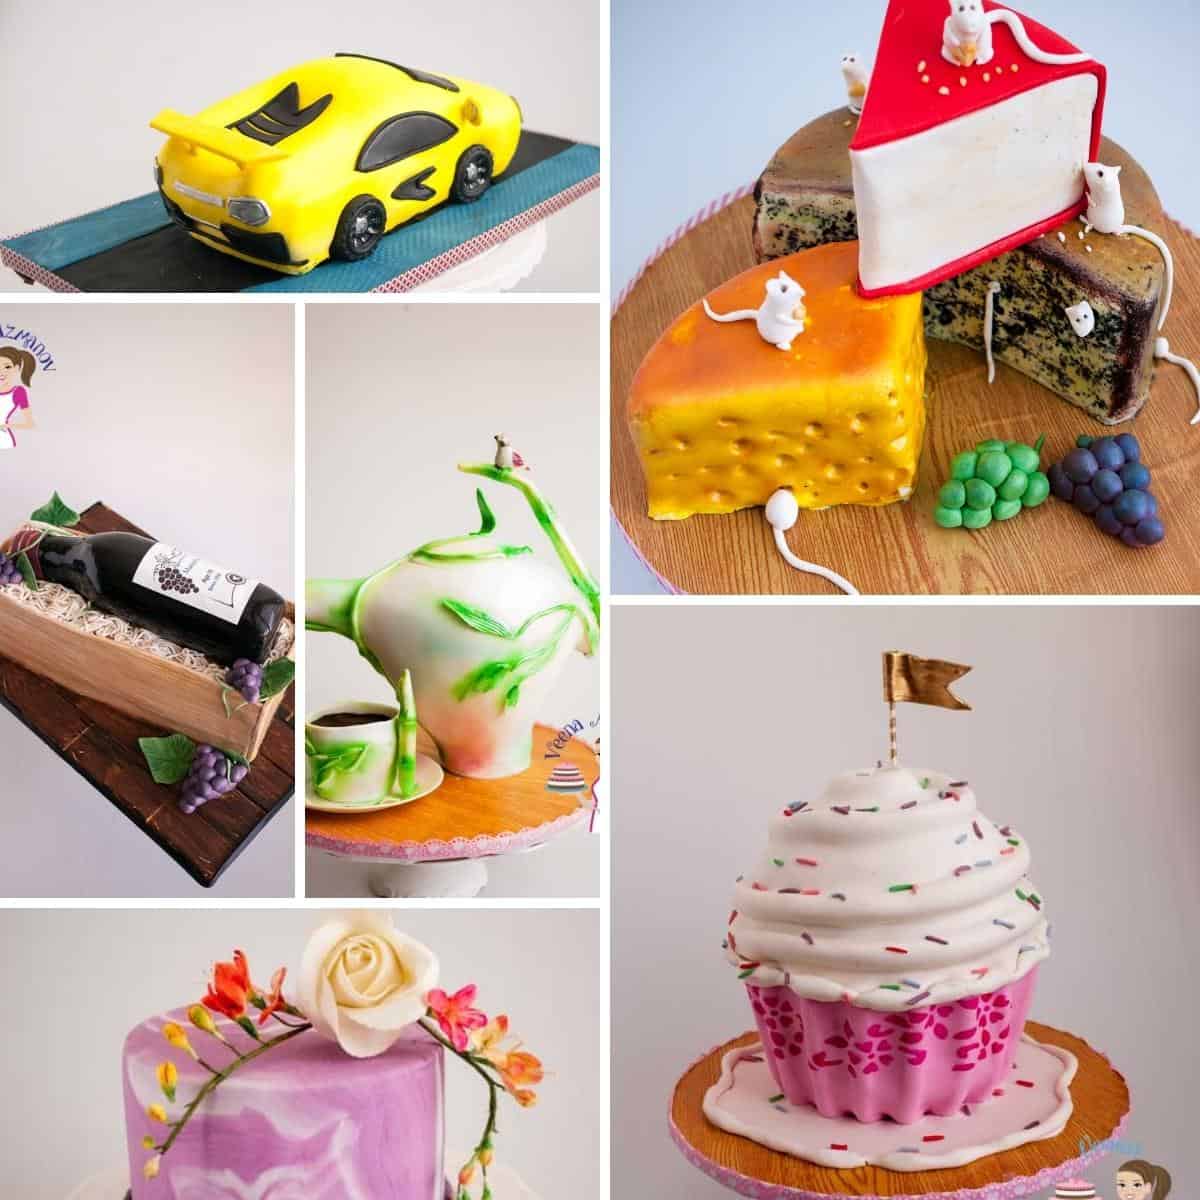 A collage of decorating cake using modeling chocolate.